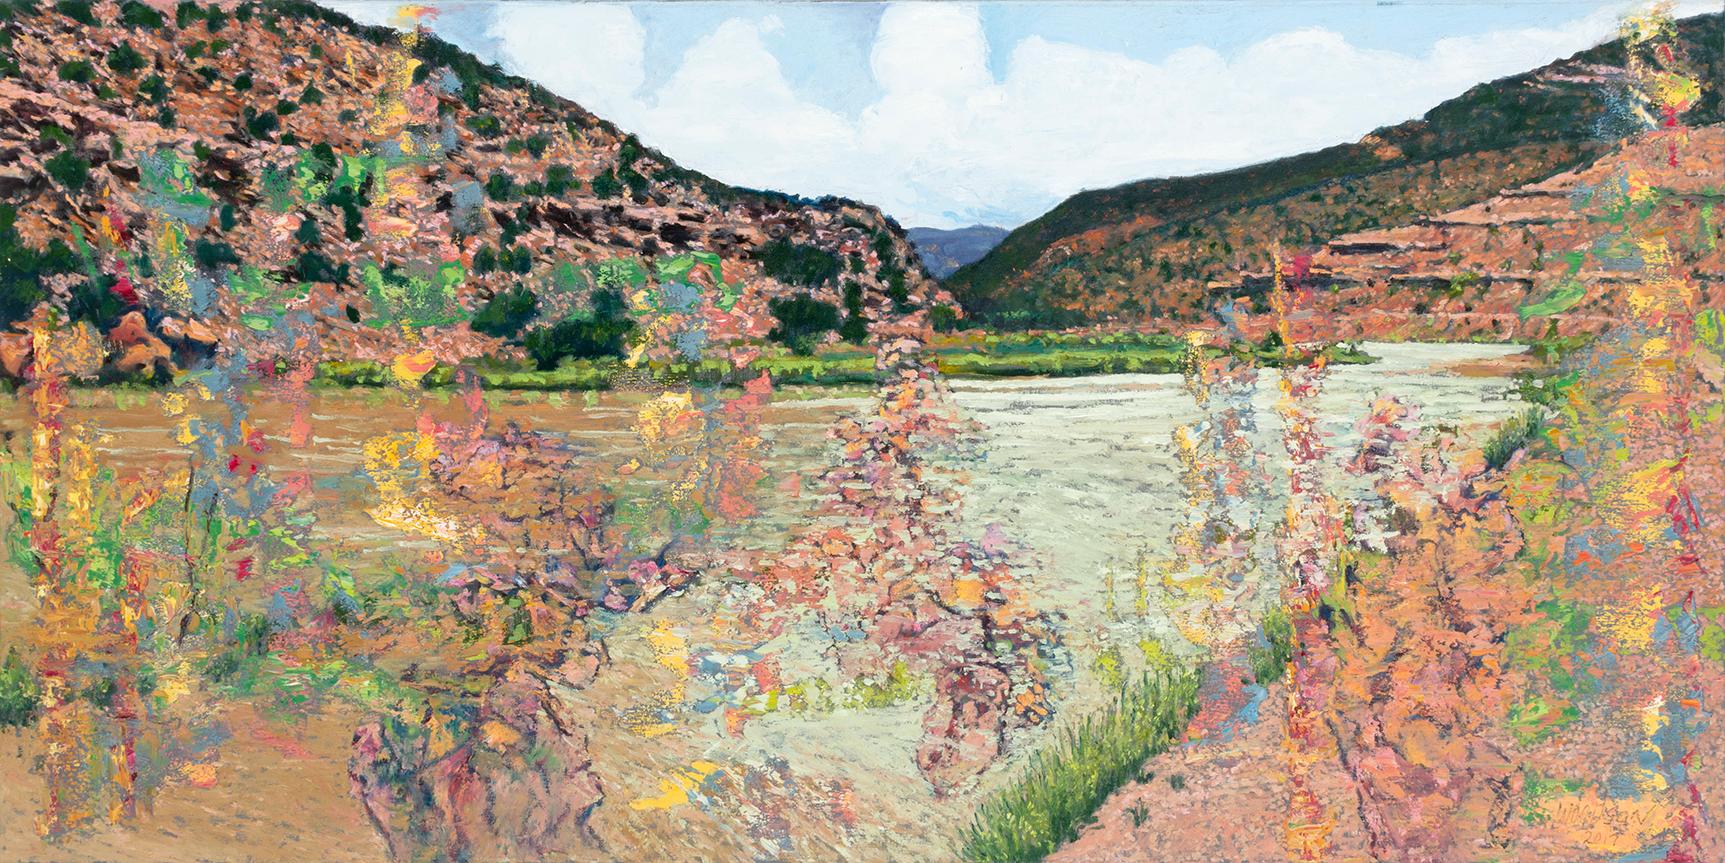 Landscape Painting Jim Woodson - Recovered Arising Perceived Emanations (émanations perçues)